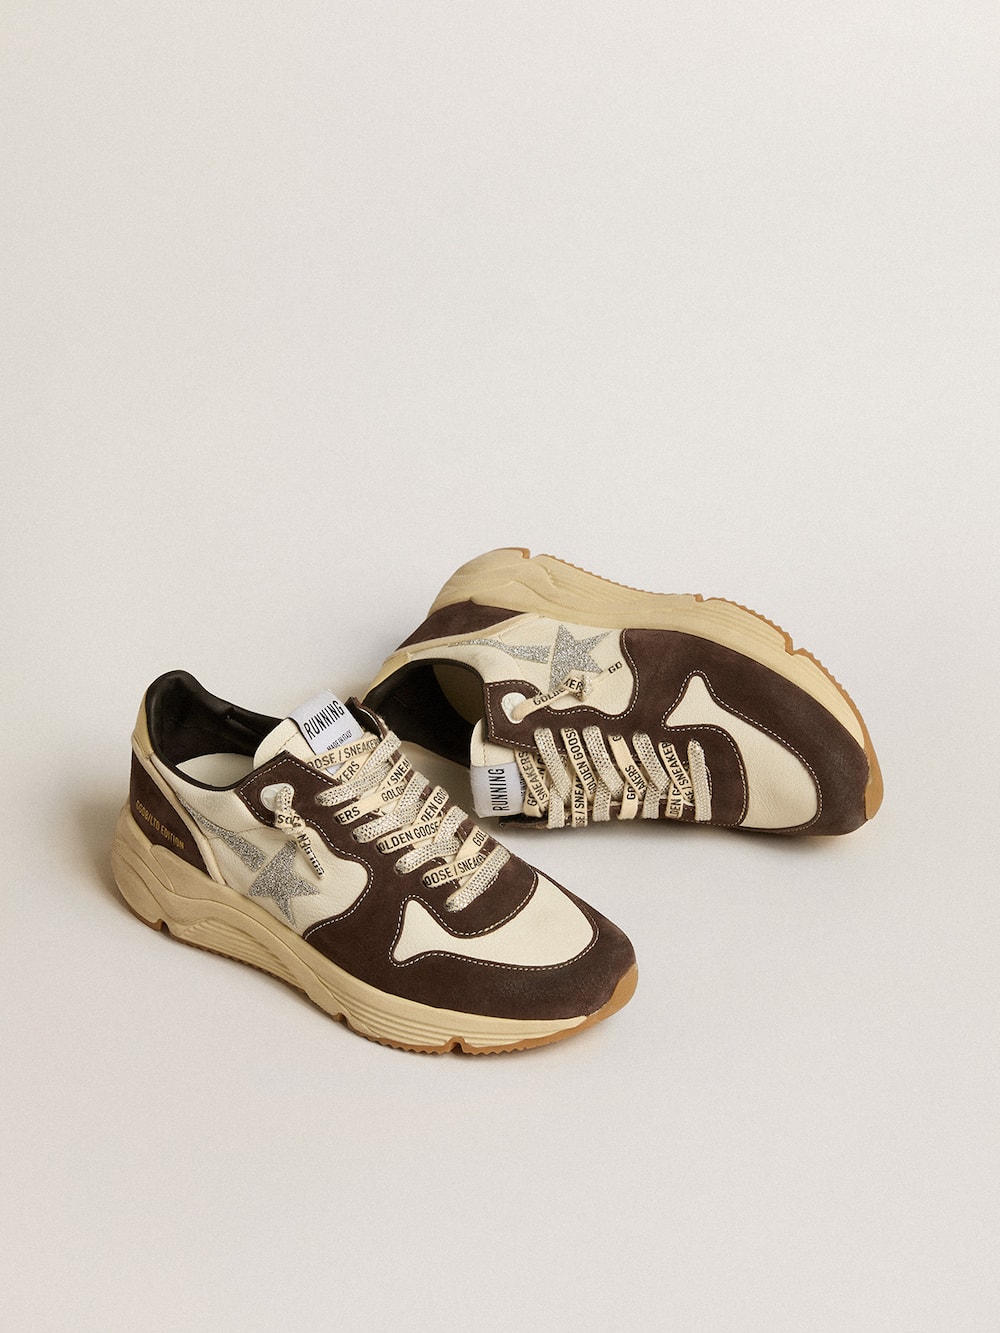 Golden Goose - Running Sole LTD in nappa and brown suede with a Swarovski crystal star in 